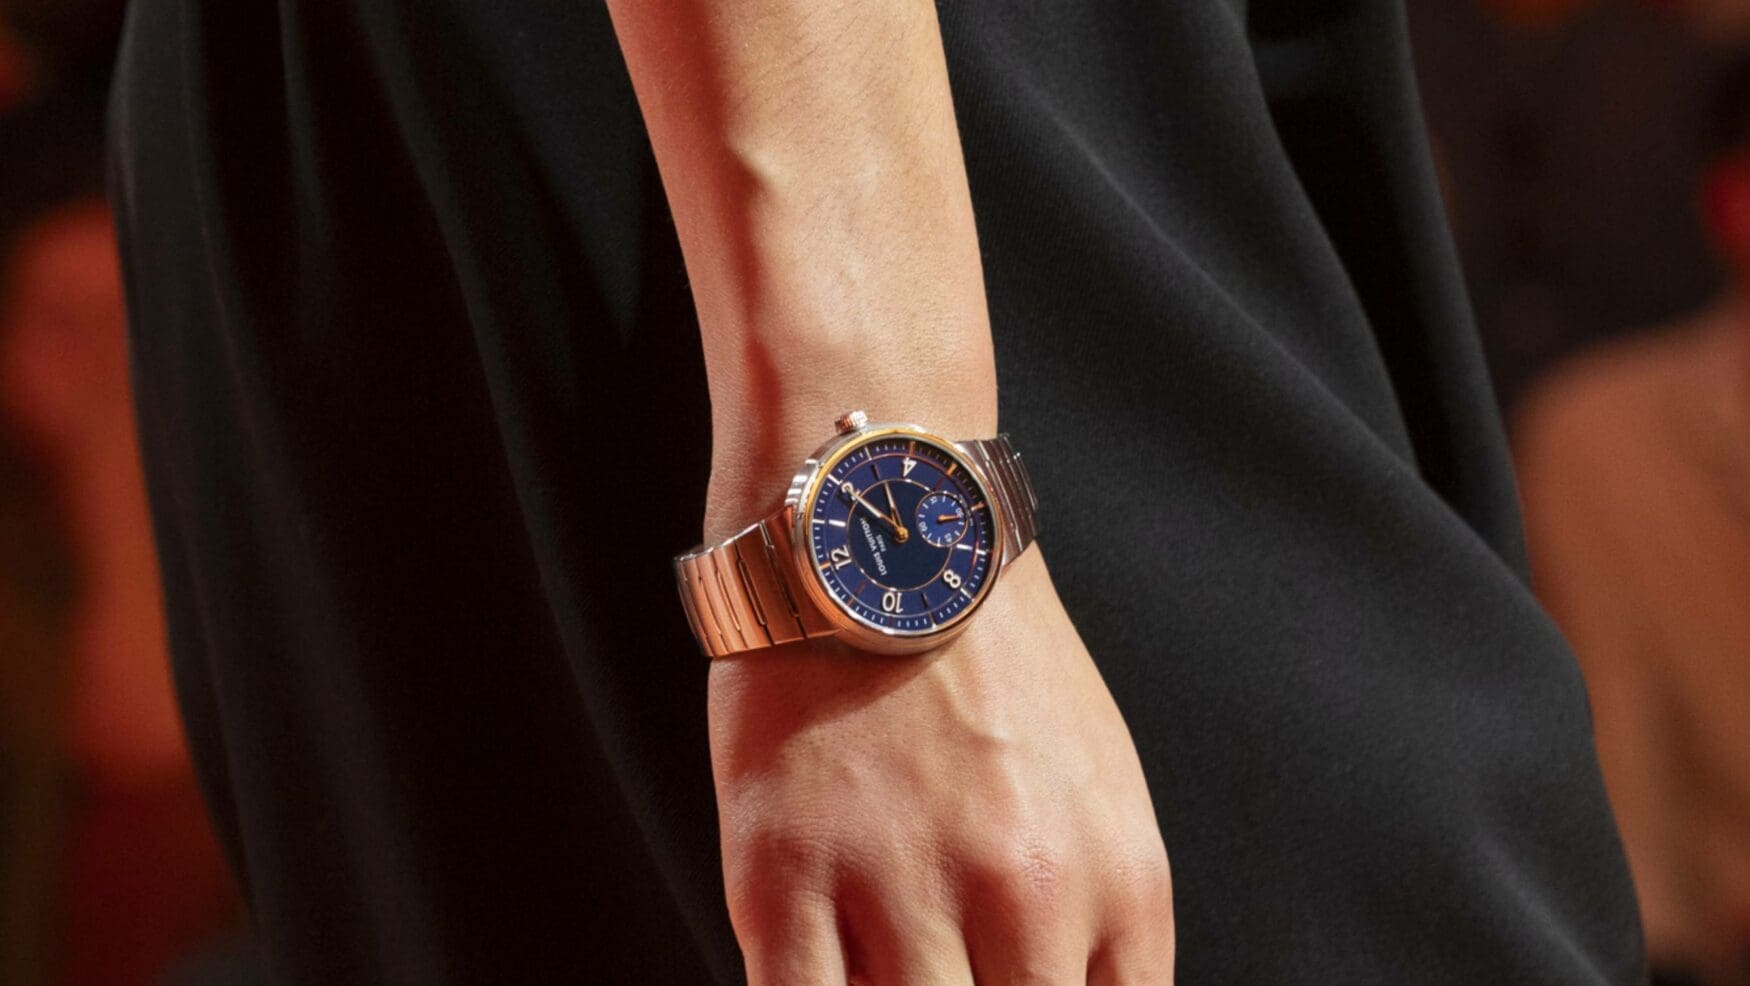 The Louis Vuitton watchmaking moment everyone missed at Paris Fashion Week